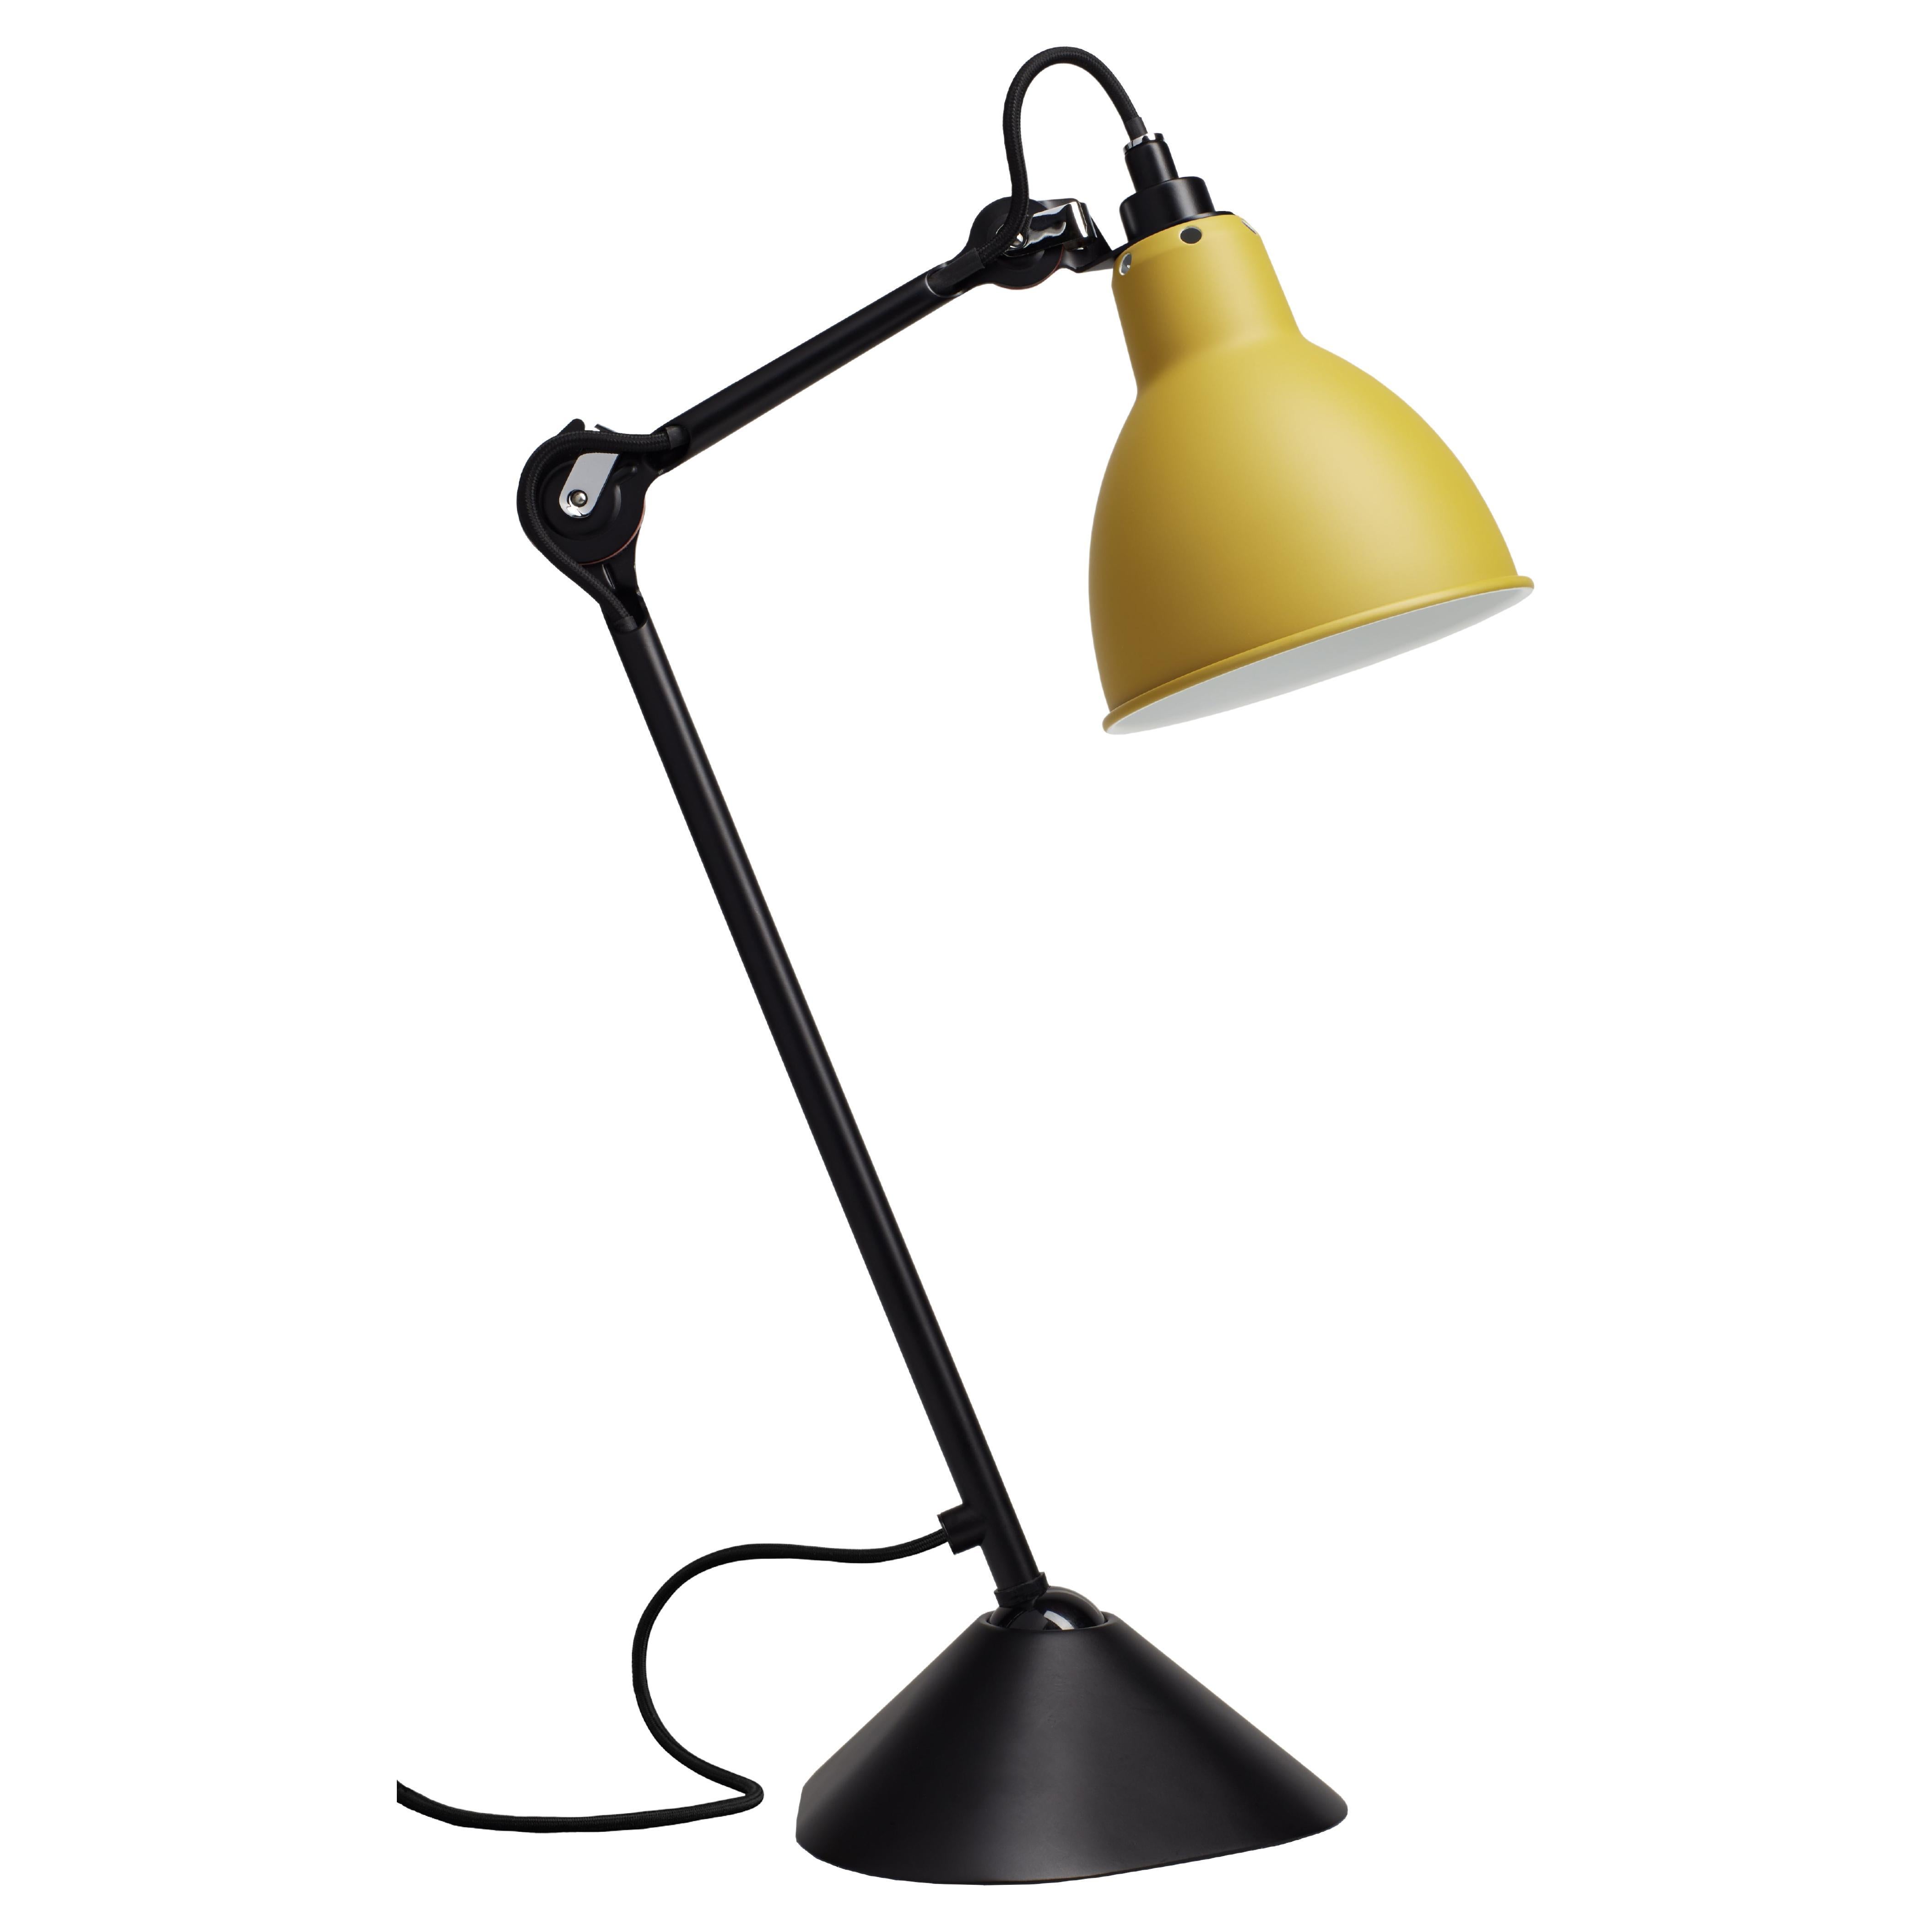 DCW Editions La Lampe Gras N°205 Table Lamp in Black Arm with Yellow Shade